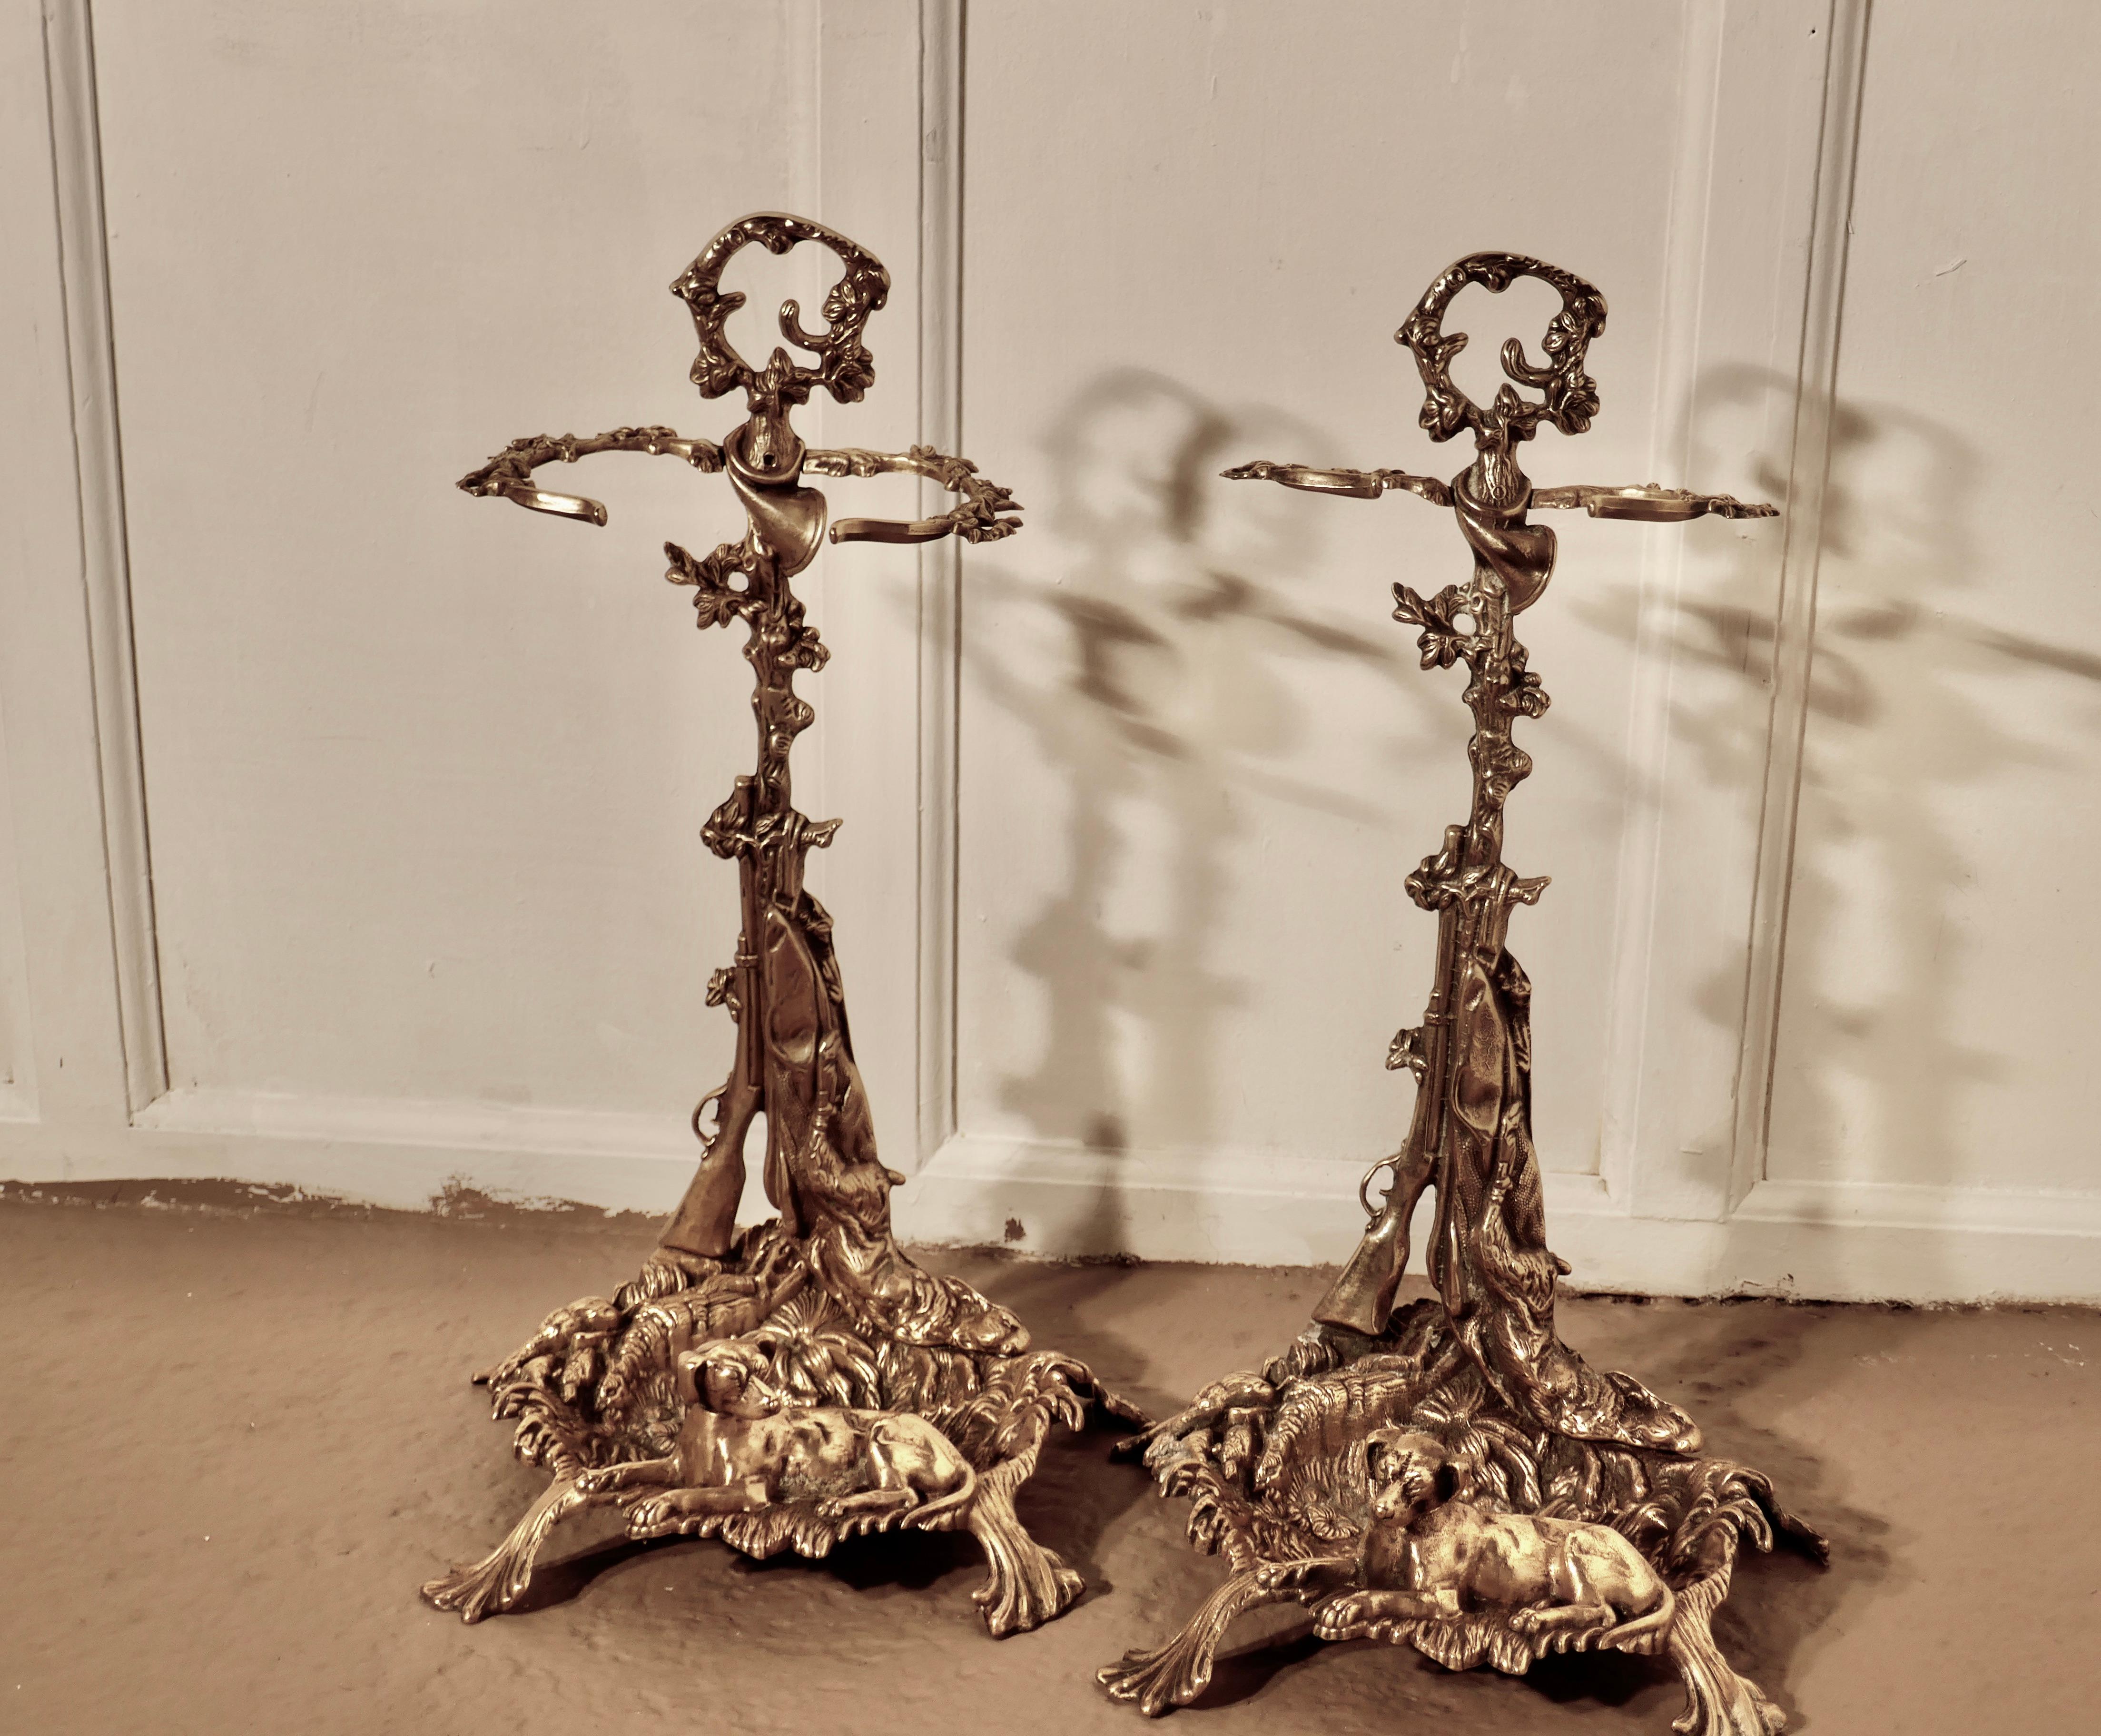 Pair of unusual French hunting theme (Chasse) brass stick stands

These lovely pieces come from France, they are in the Chasse style and decorated with hunting dogs, guns, horns, all the trappings needed for the hunt
Both stands are in excellent